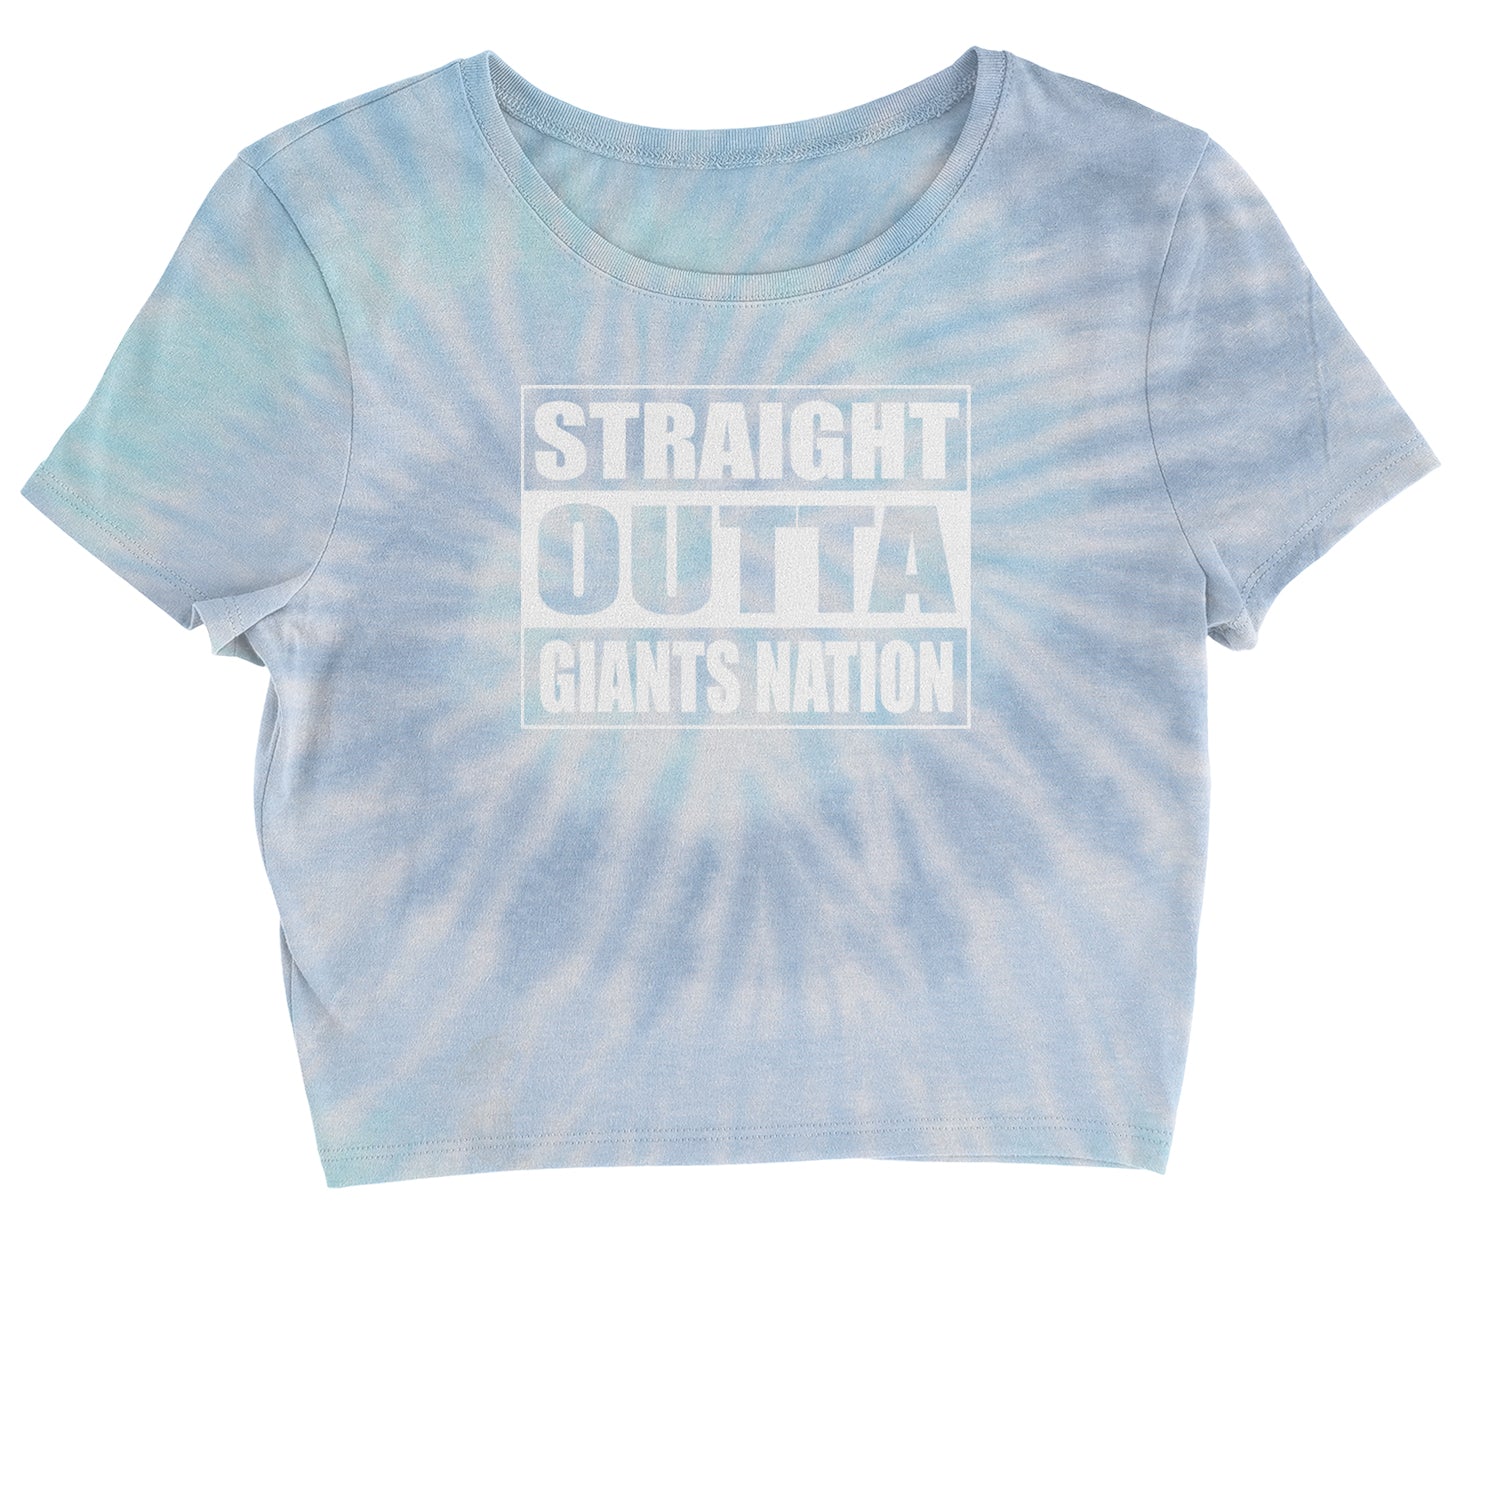 Straight Outta Giants Nation Cropped T-Shirt bleed, blue, football, giants, new, ny, york by Expression Tees